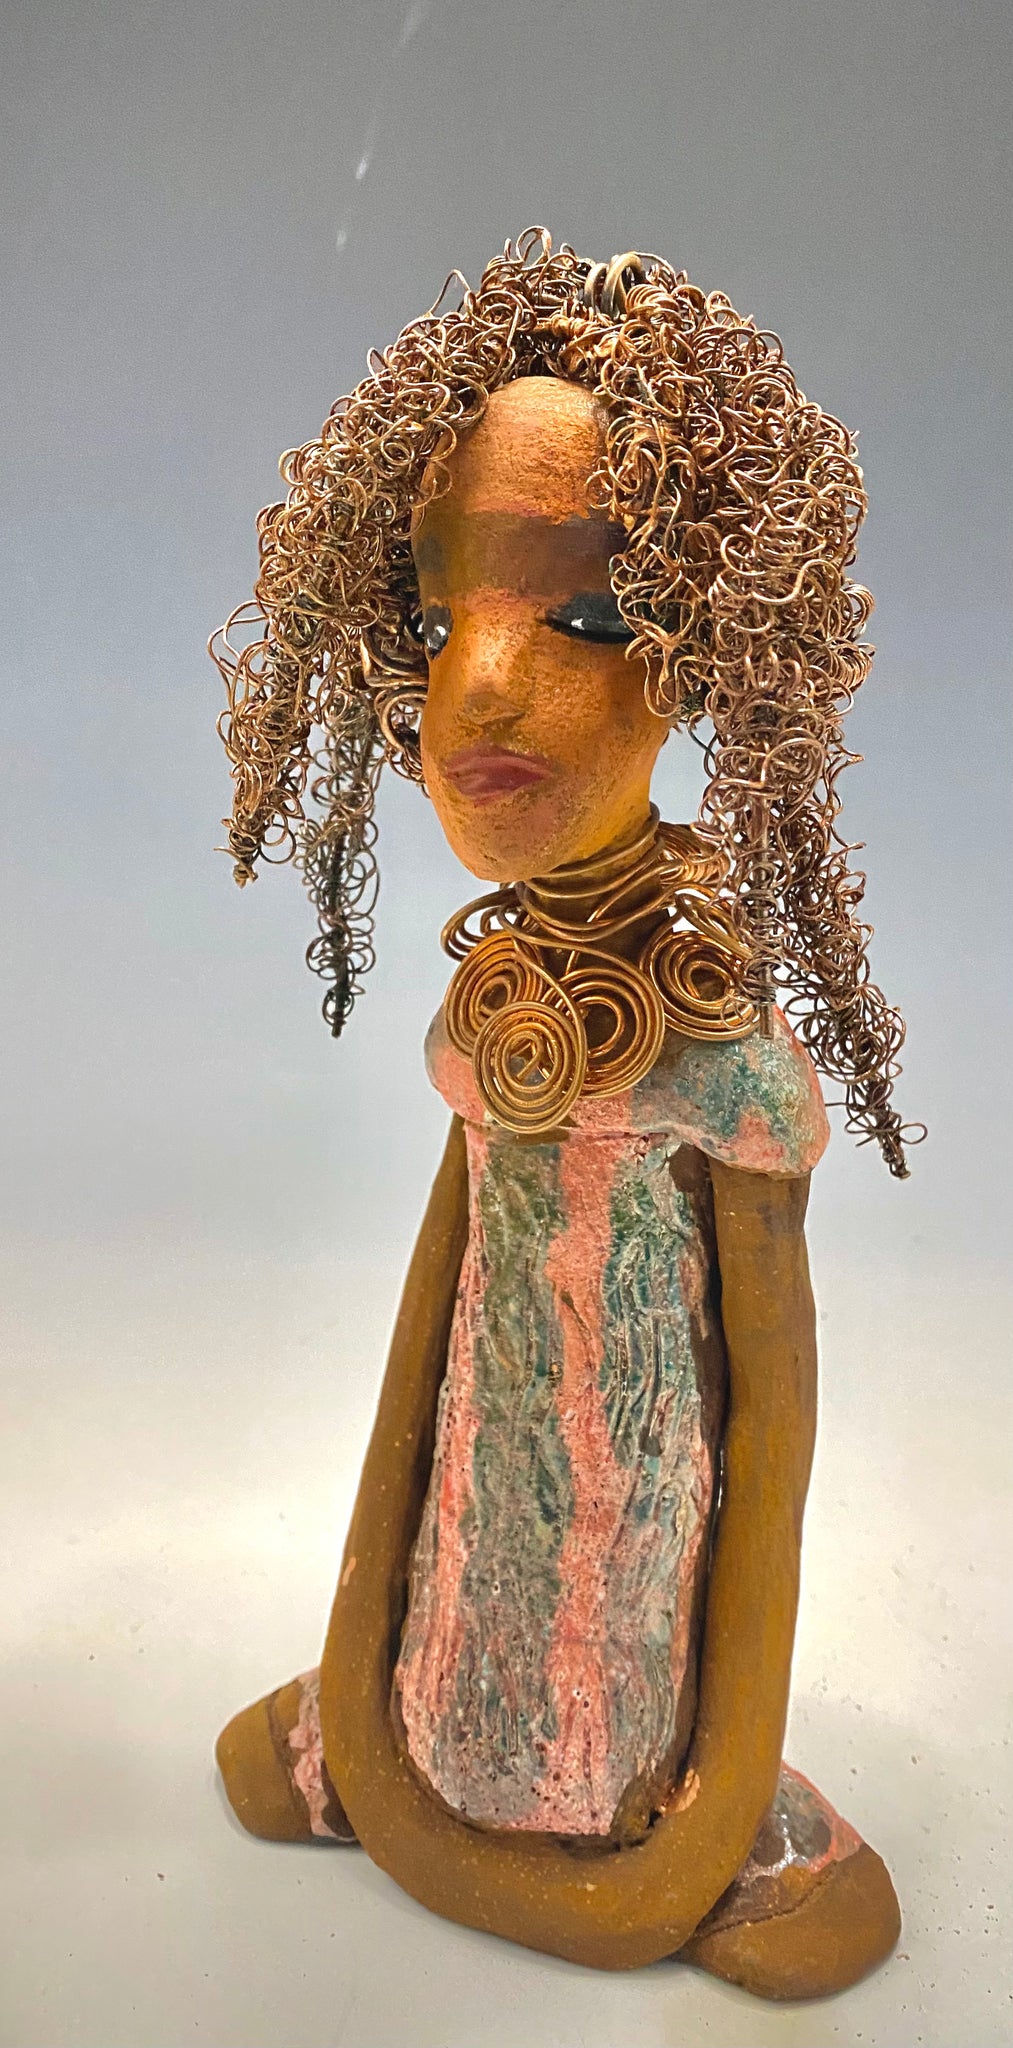 " I am really pleased with Jada's copper coiled necklace and her new wire hair. It complements her well!" Jada stands 9" x 4.5" x 2.5" and weighs 1 lb. She has a lovely two tone honey brown complexion. Jada's dress is a metallic glaze with copper red stripes. She has her long loving arms resting at her side. Find a place in your space for Jada!